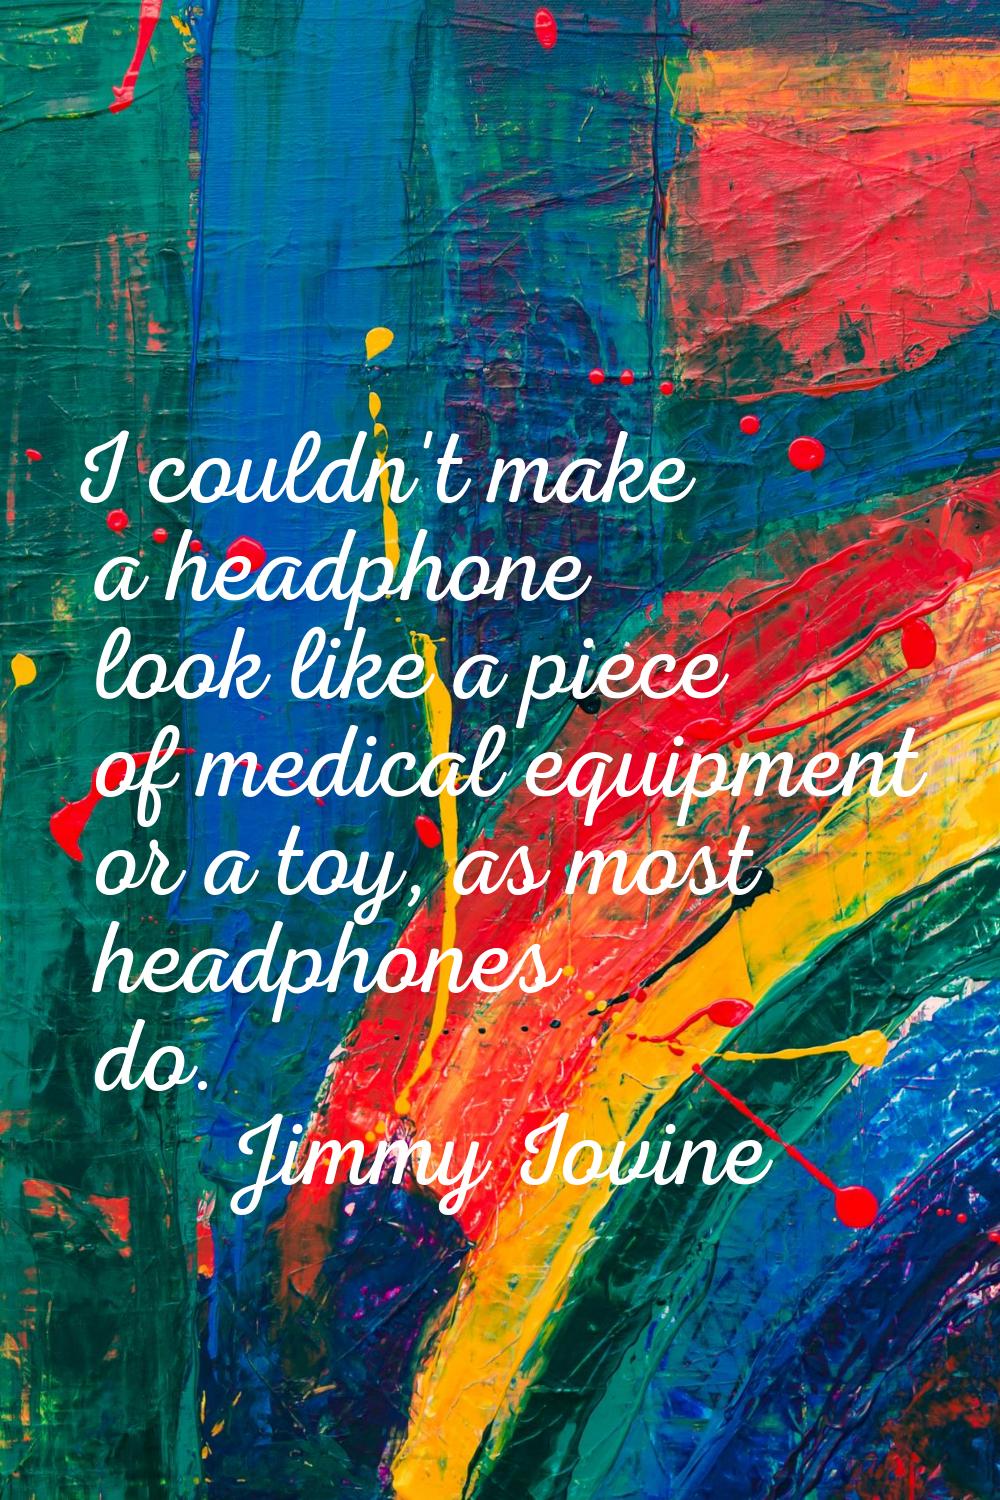 I couldn't make a headphone look like a piece of medical equipment or a toy, as most headphones do.